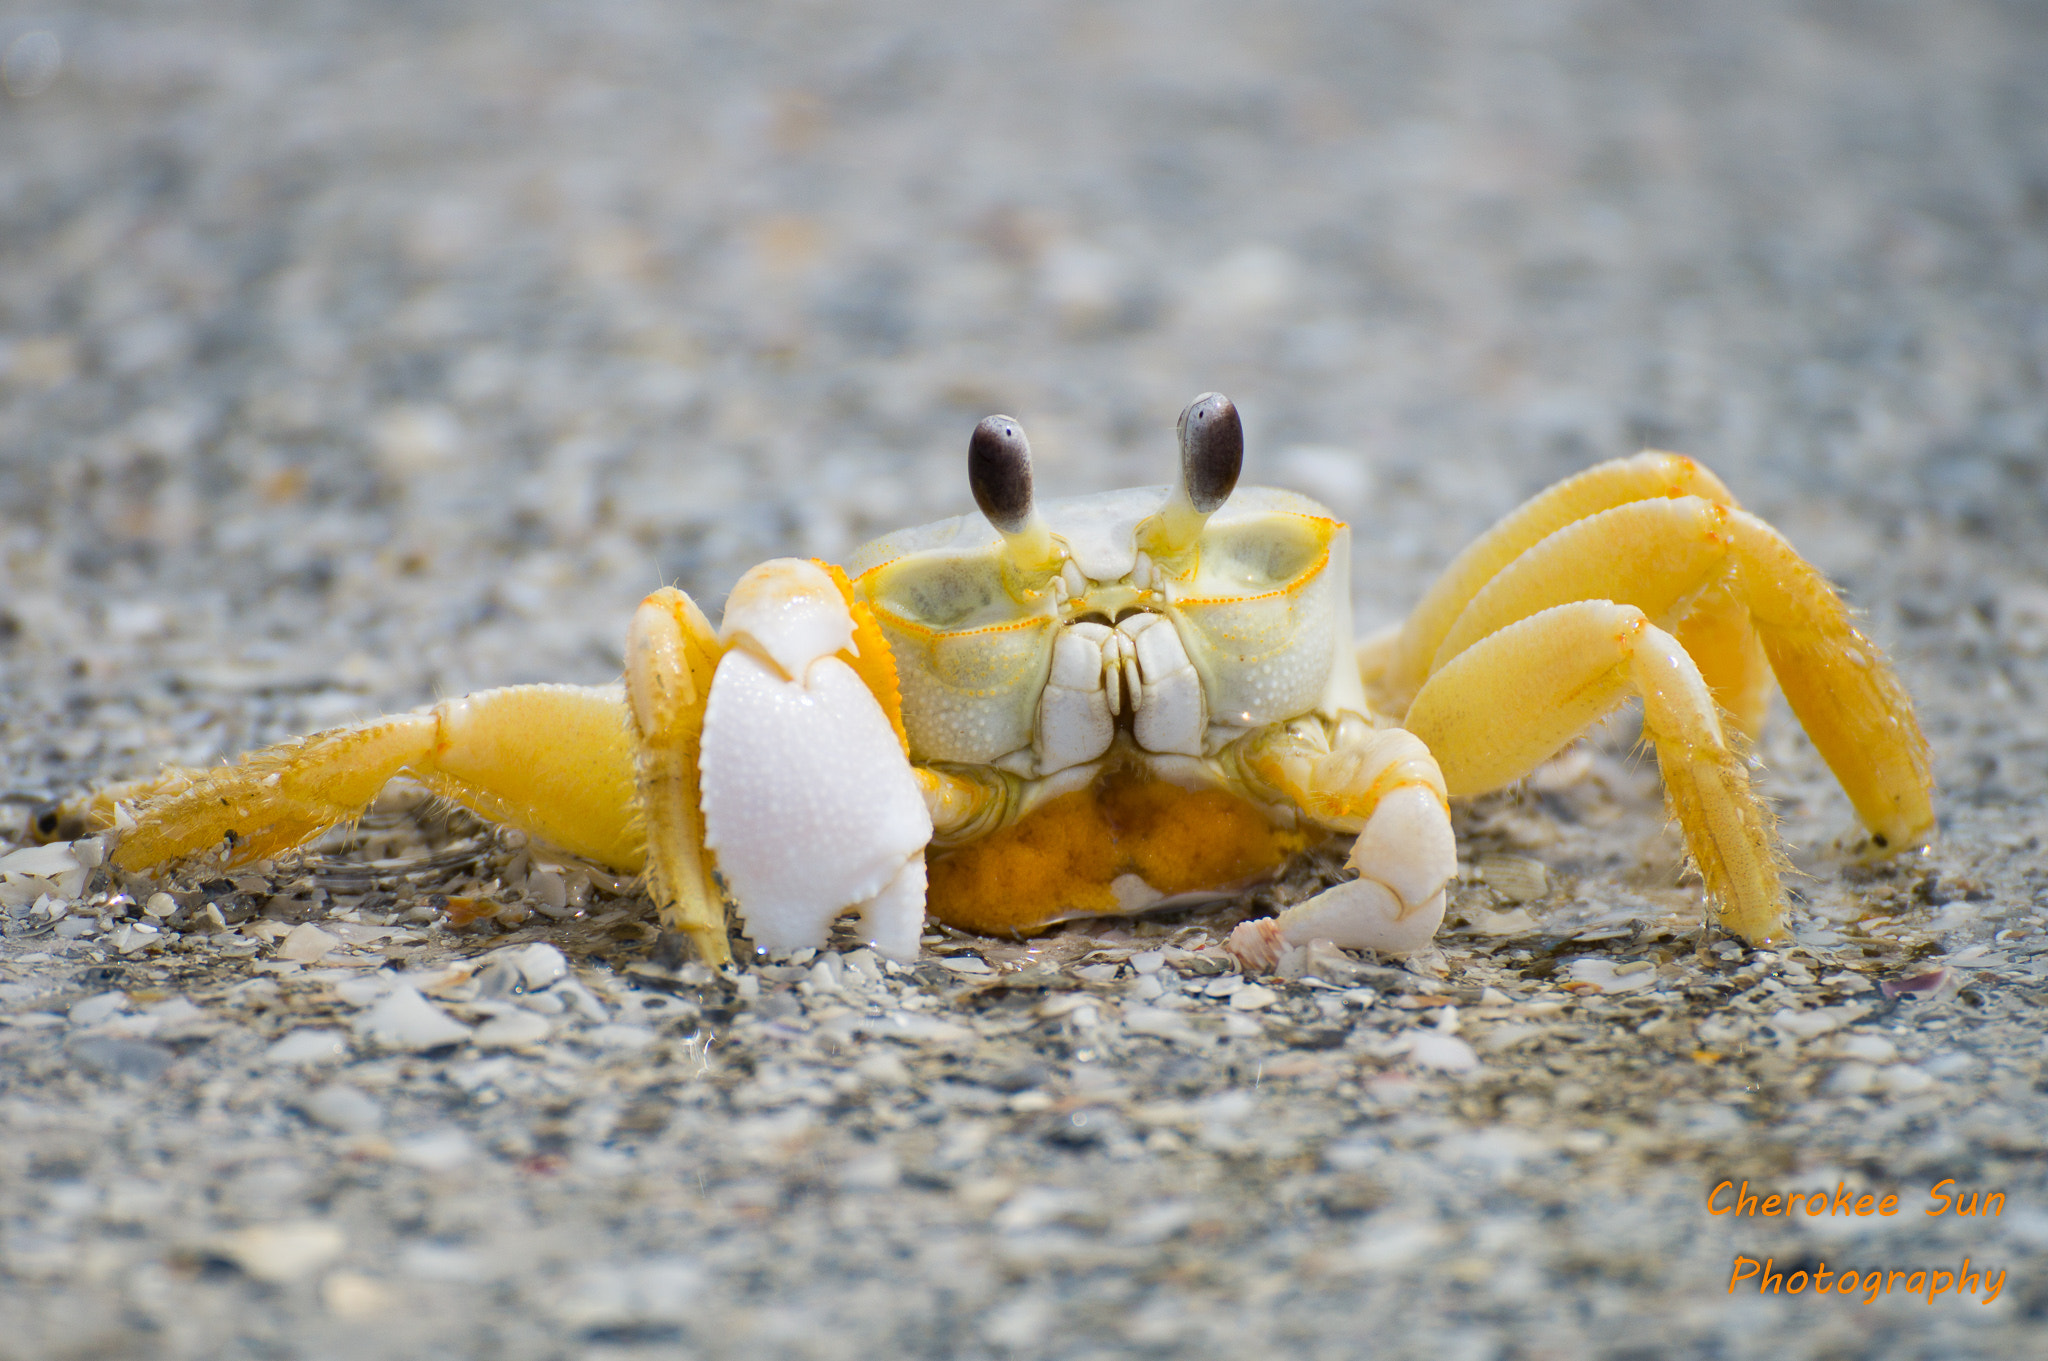 Sony SLT-A57 + Tamron SP 70-300mm F4-5.6 Di USD sample photo. Ghost crab on the beach photography